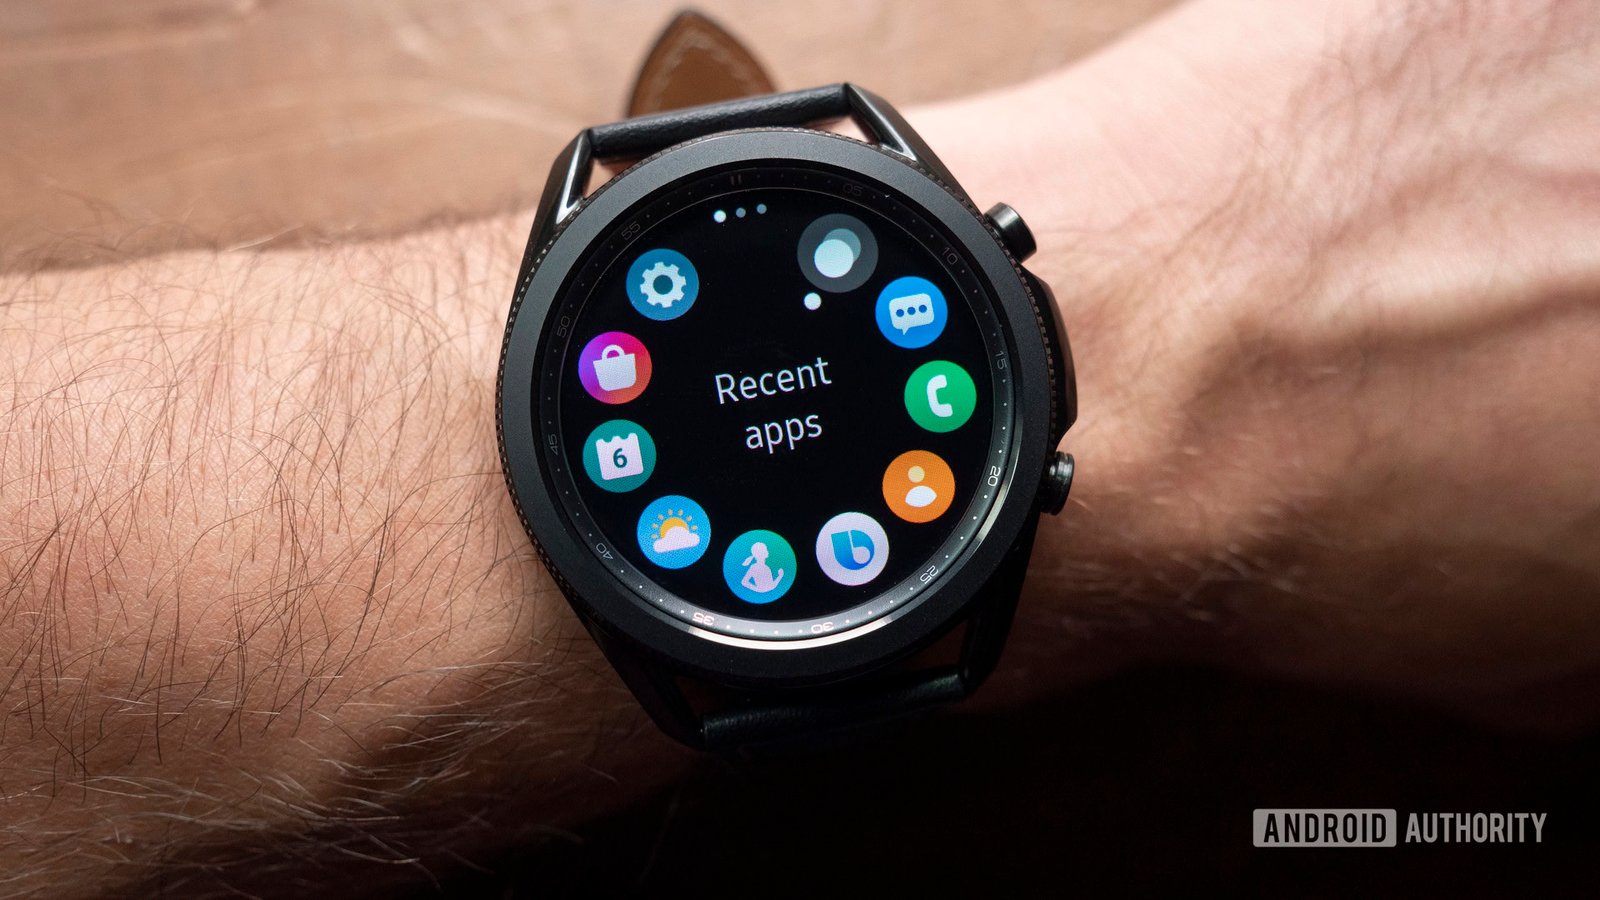 Samsung puts Tizen smartwatches on life support